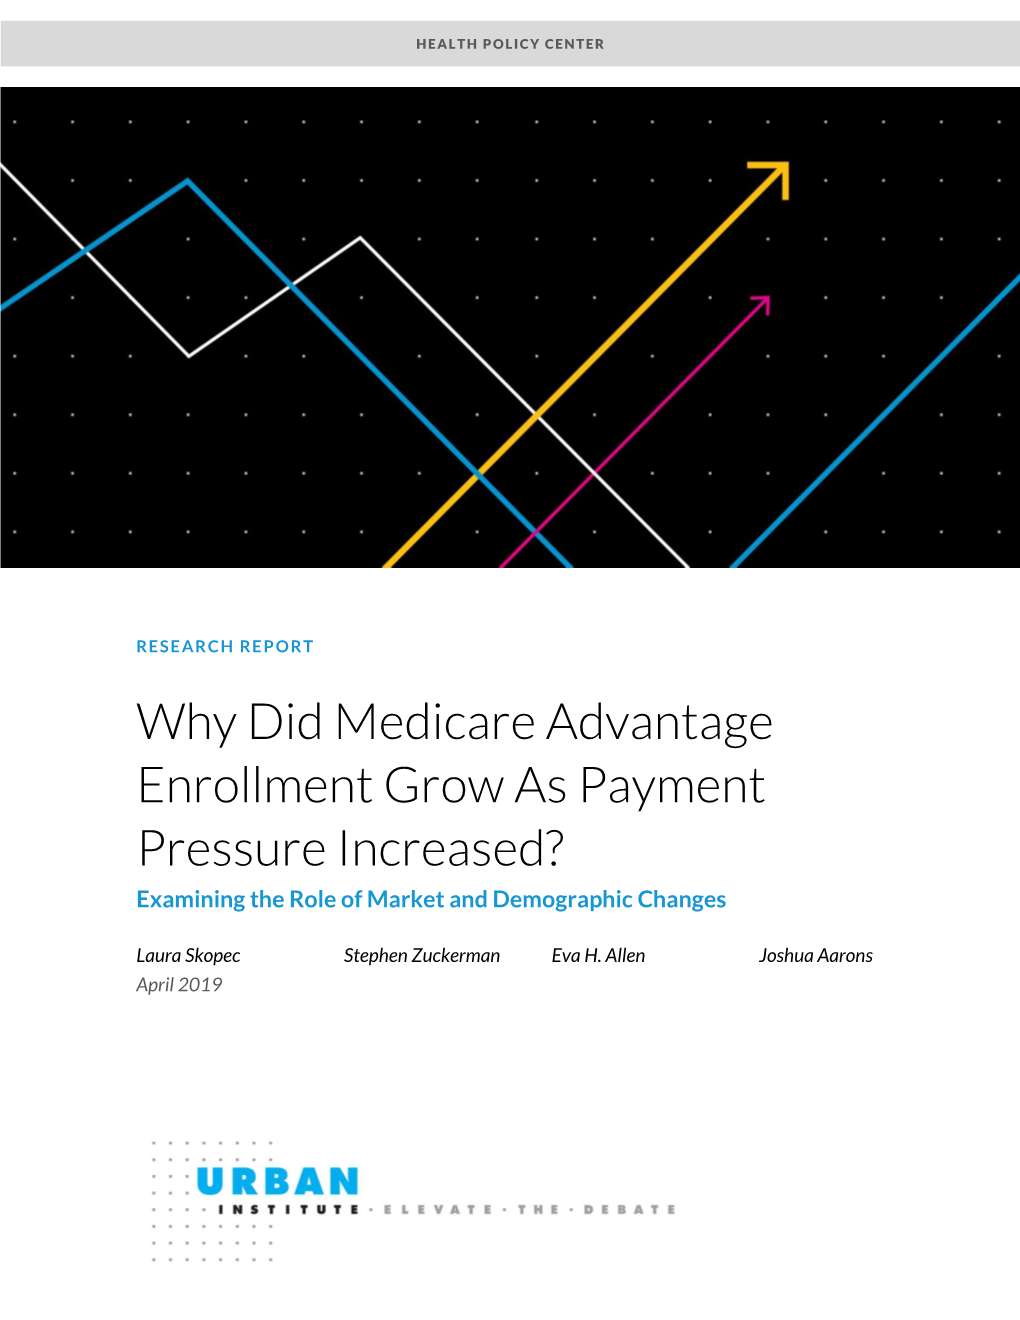 Why Did Medicare Advantage Enrollment Grow As Payment Pressure Increased? Examining the Role of Market and Demographic Changes